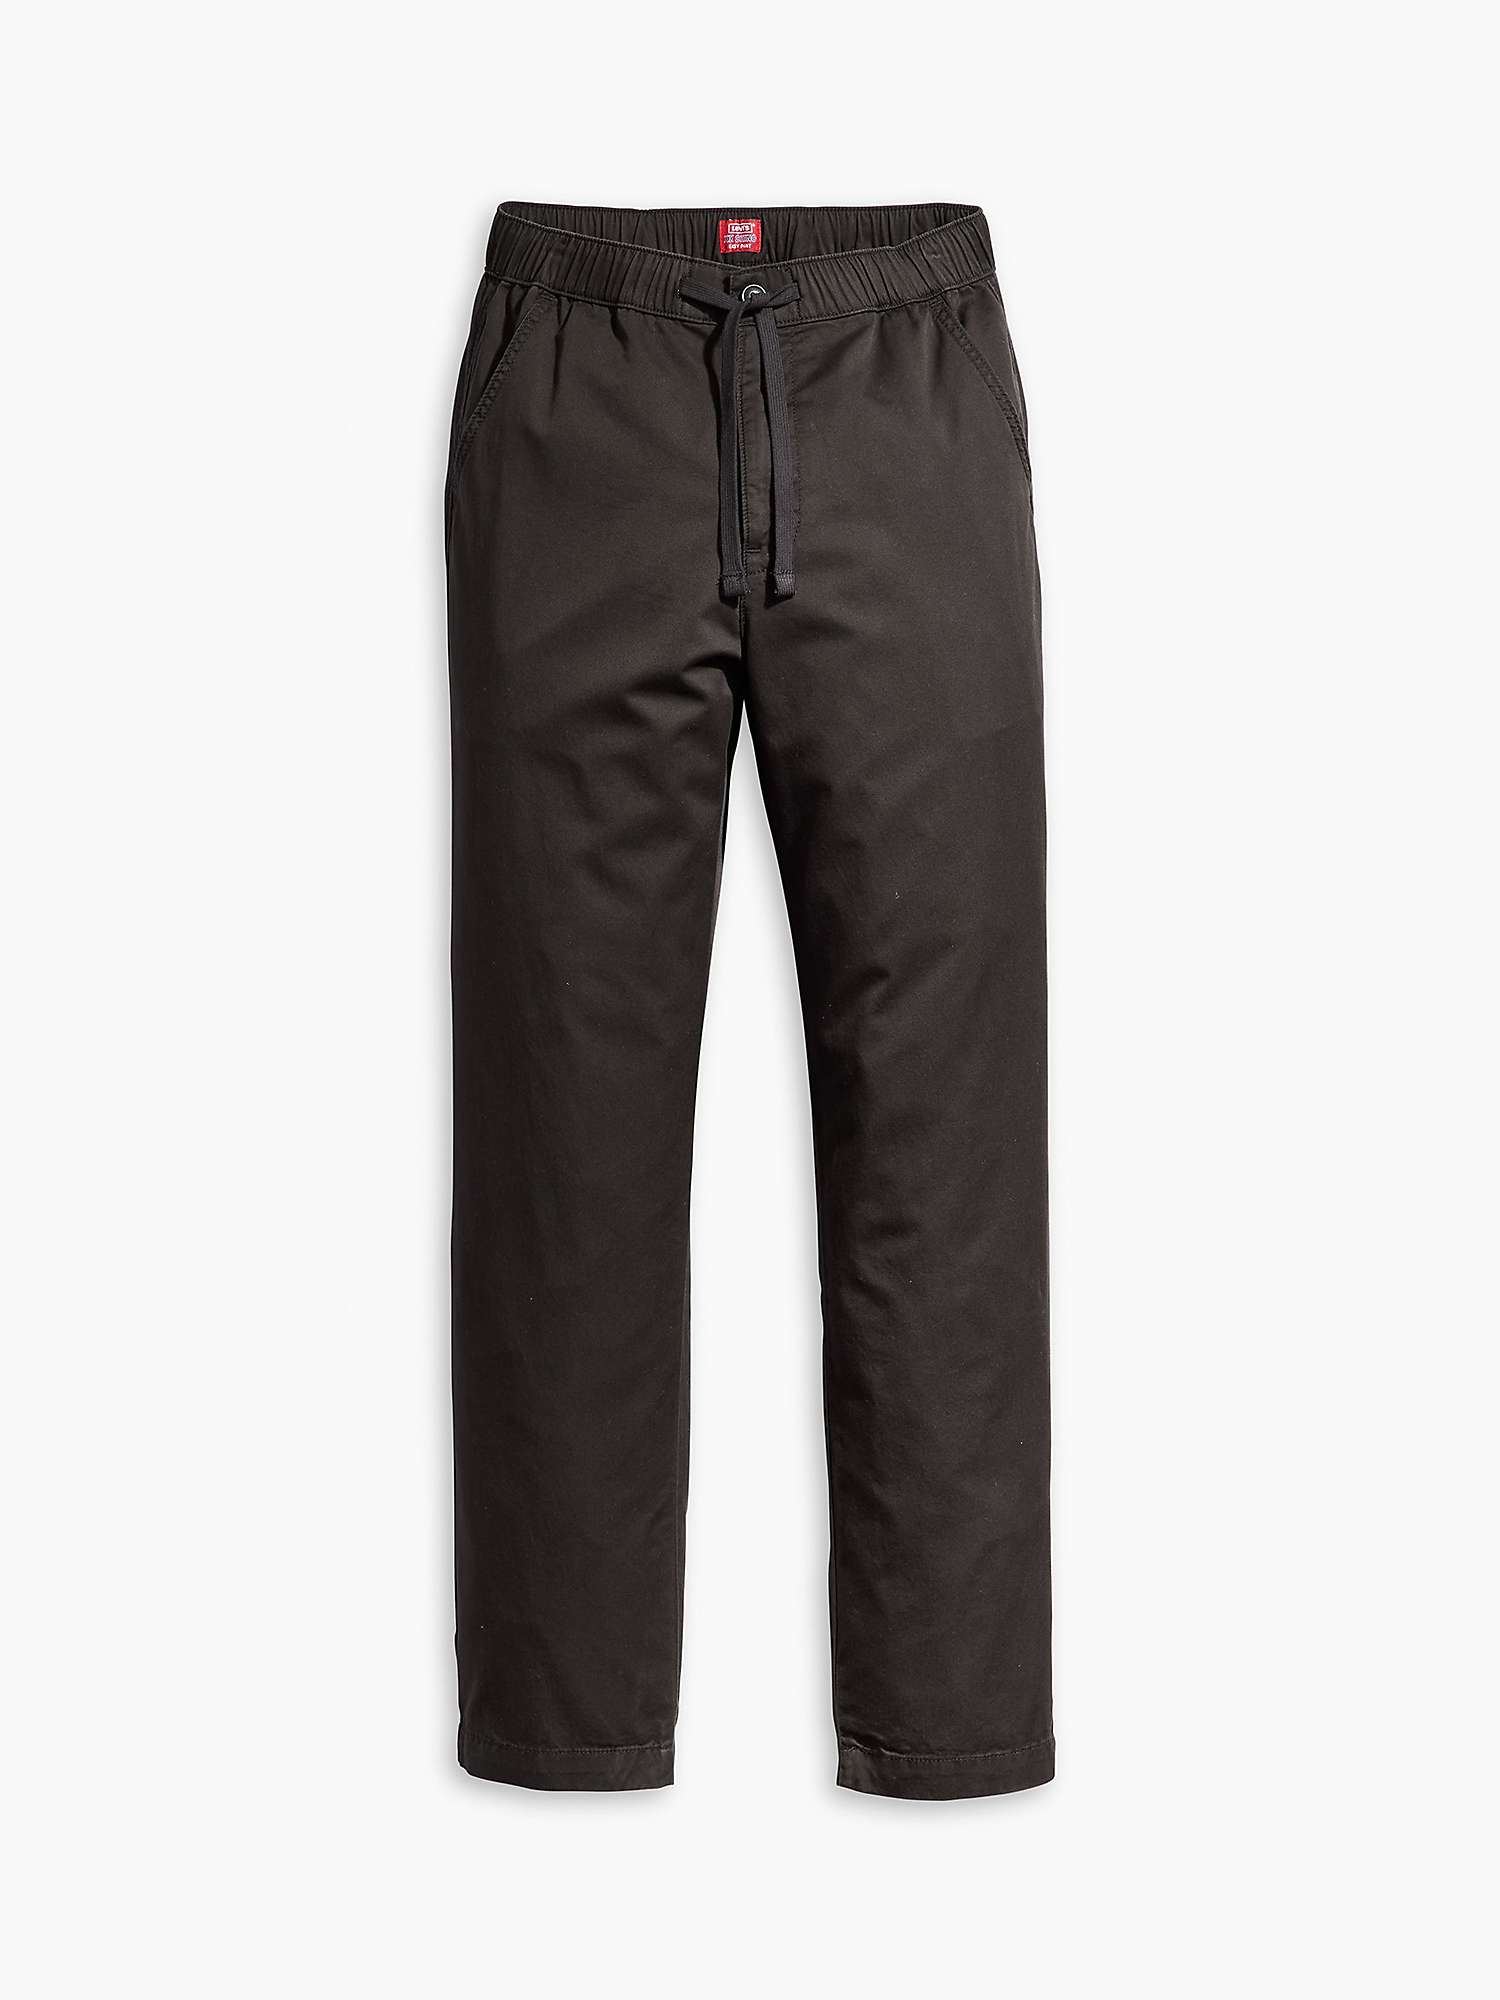 Buy Levi's XX Chino Easy Trousers, Black Online at johnlewis.com